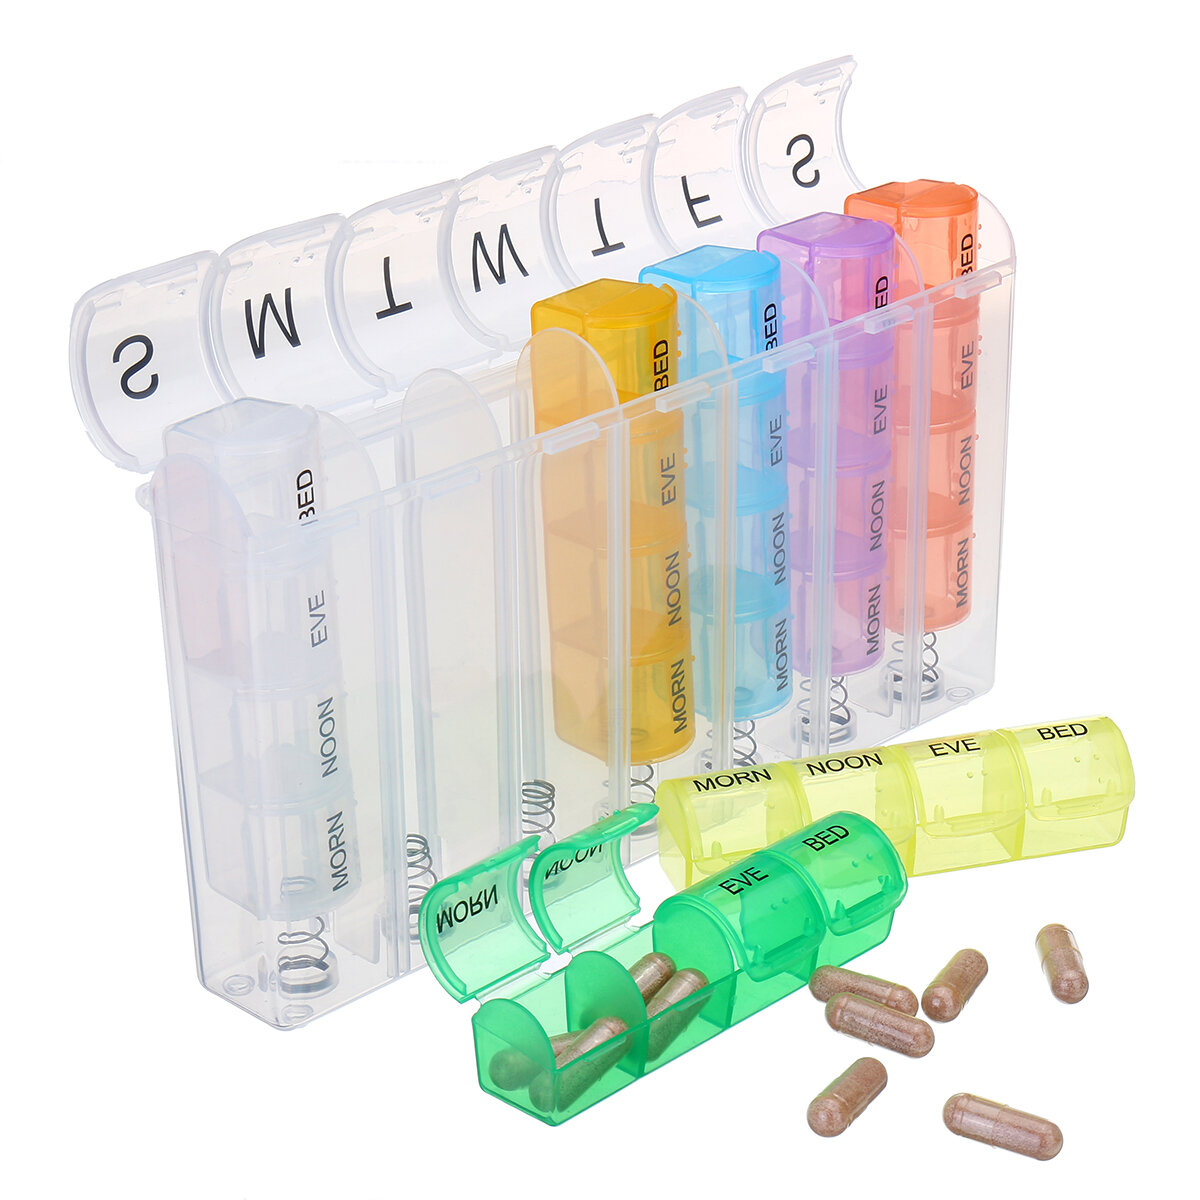 

28Pcs Pill Organizer Box Tablet Holder Pill Container Organizer Case Travel Daily Pill Storage Box